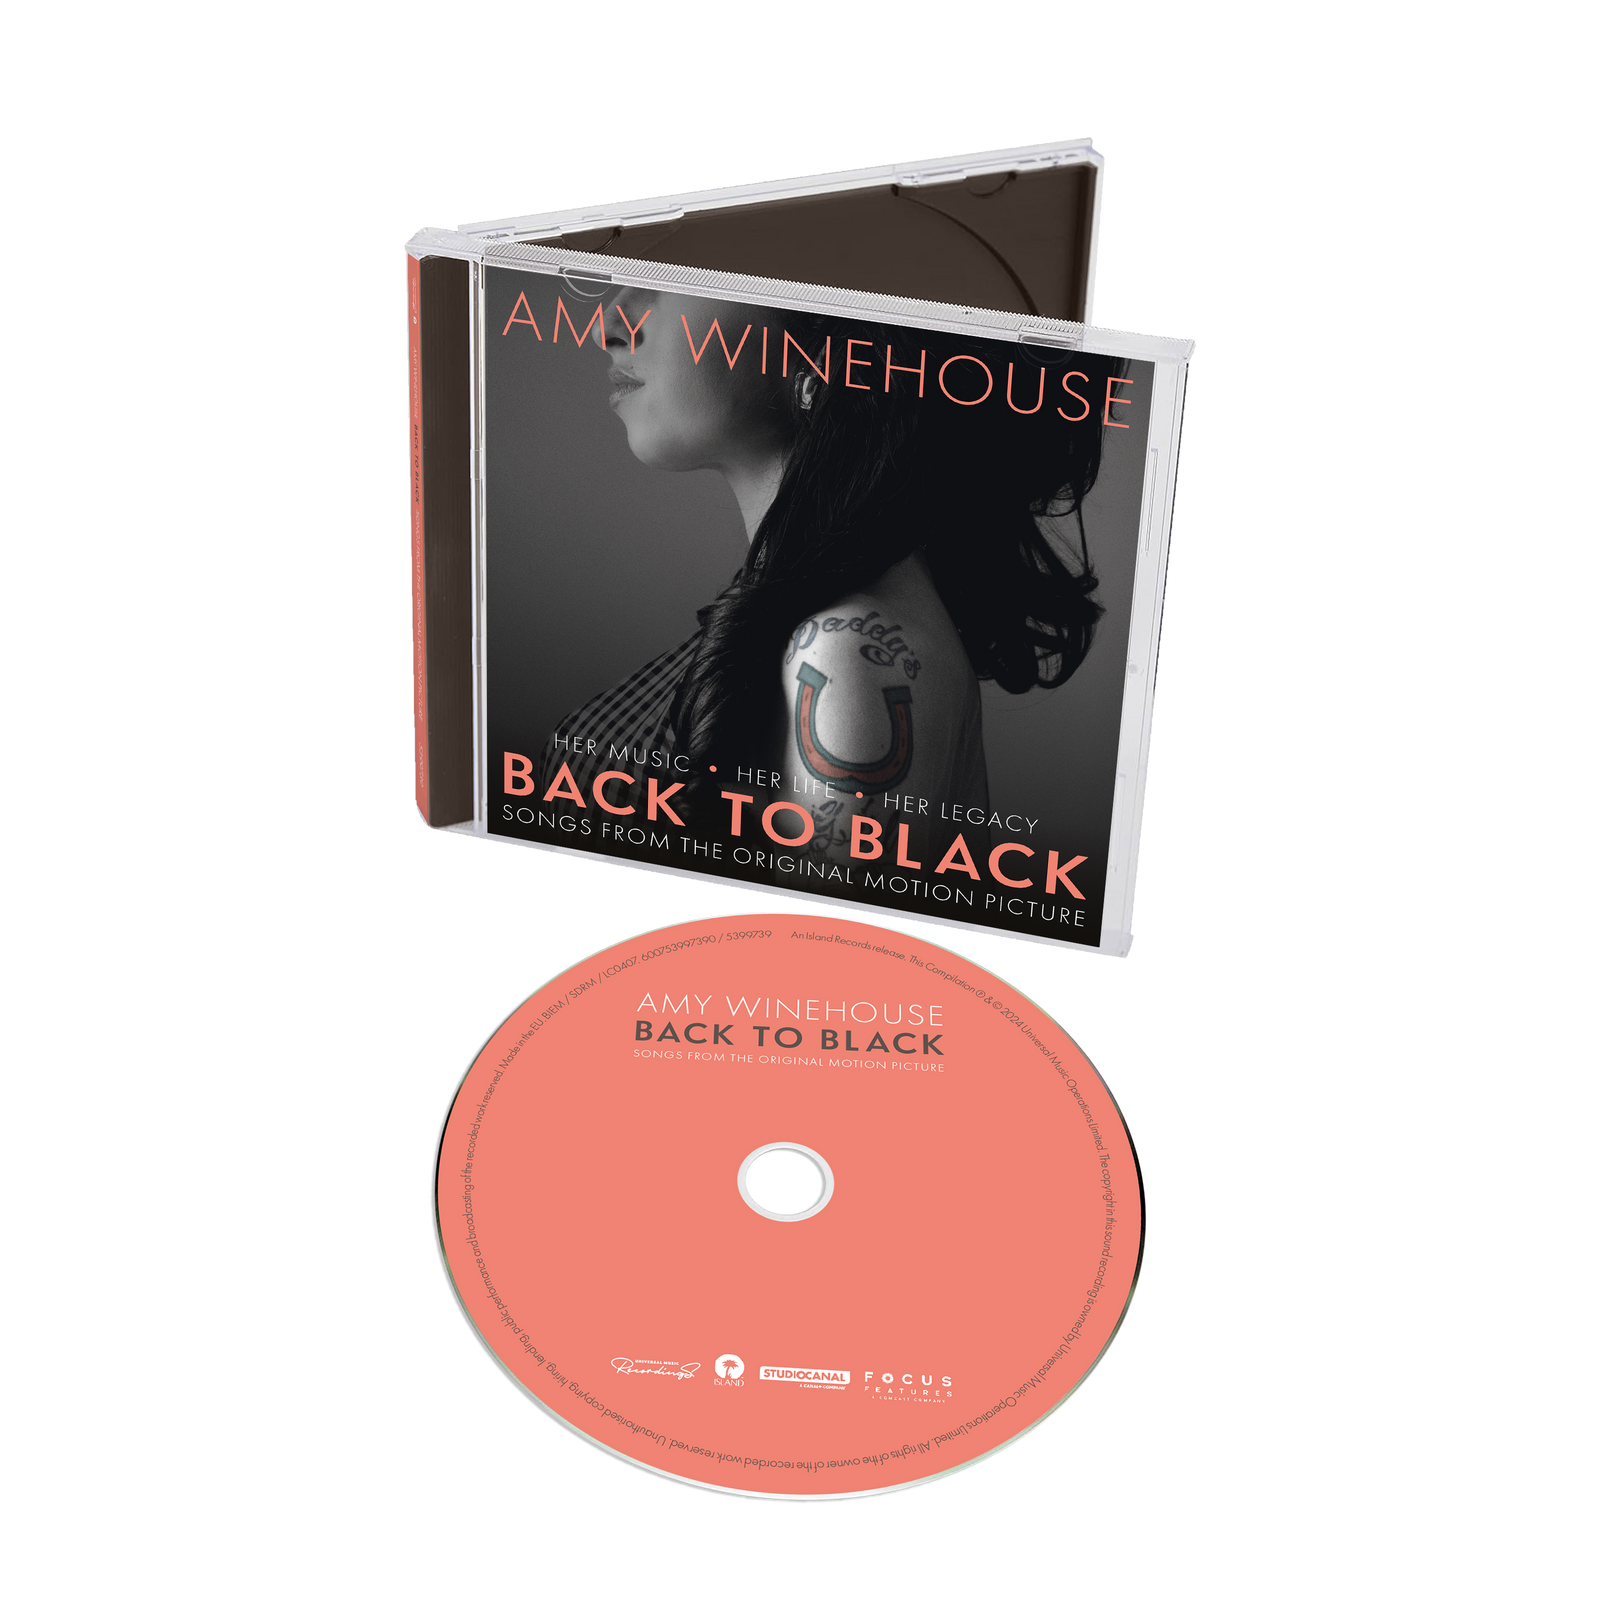 CD Shop - SOUNDTRACK Back To Black: Songs From The Original Motion Picture